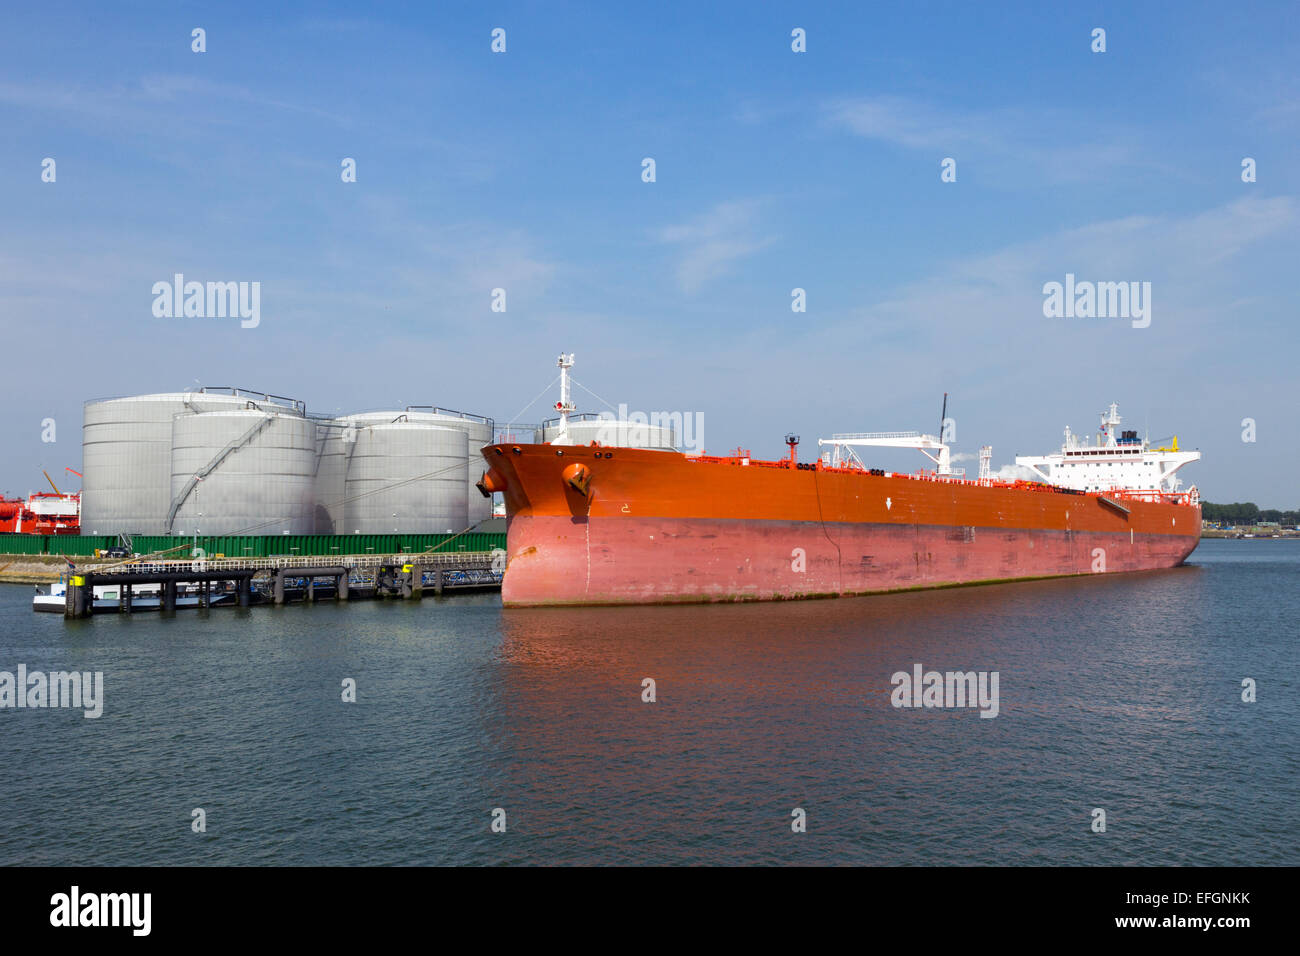 Oil tanker in the Port of Rotterdam Stock Photo